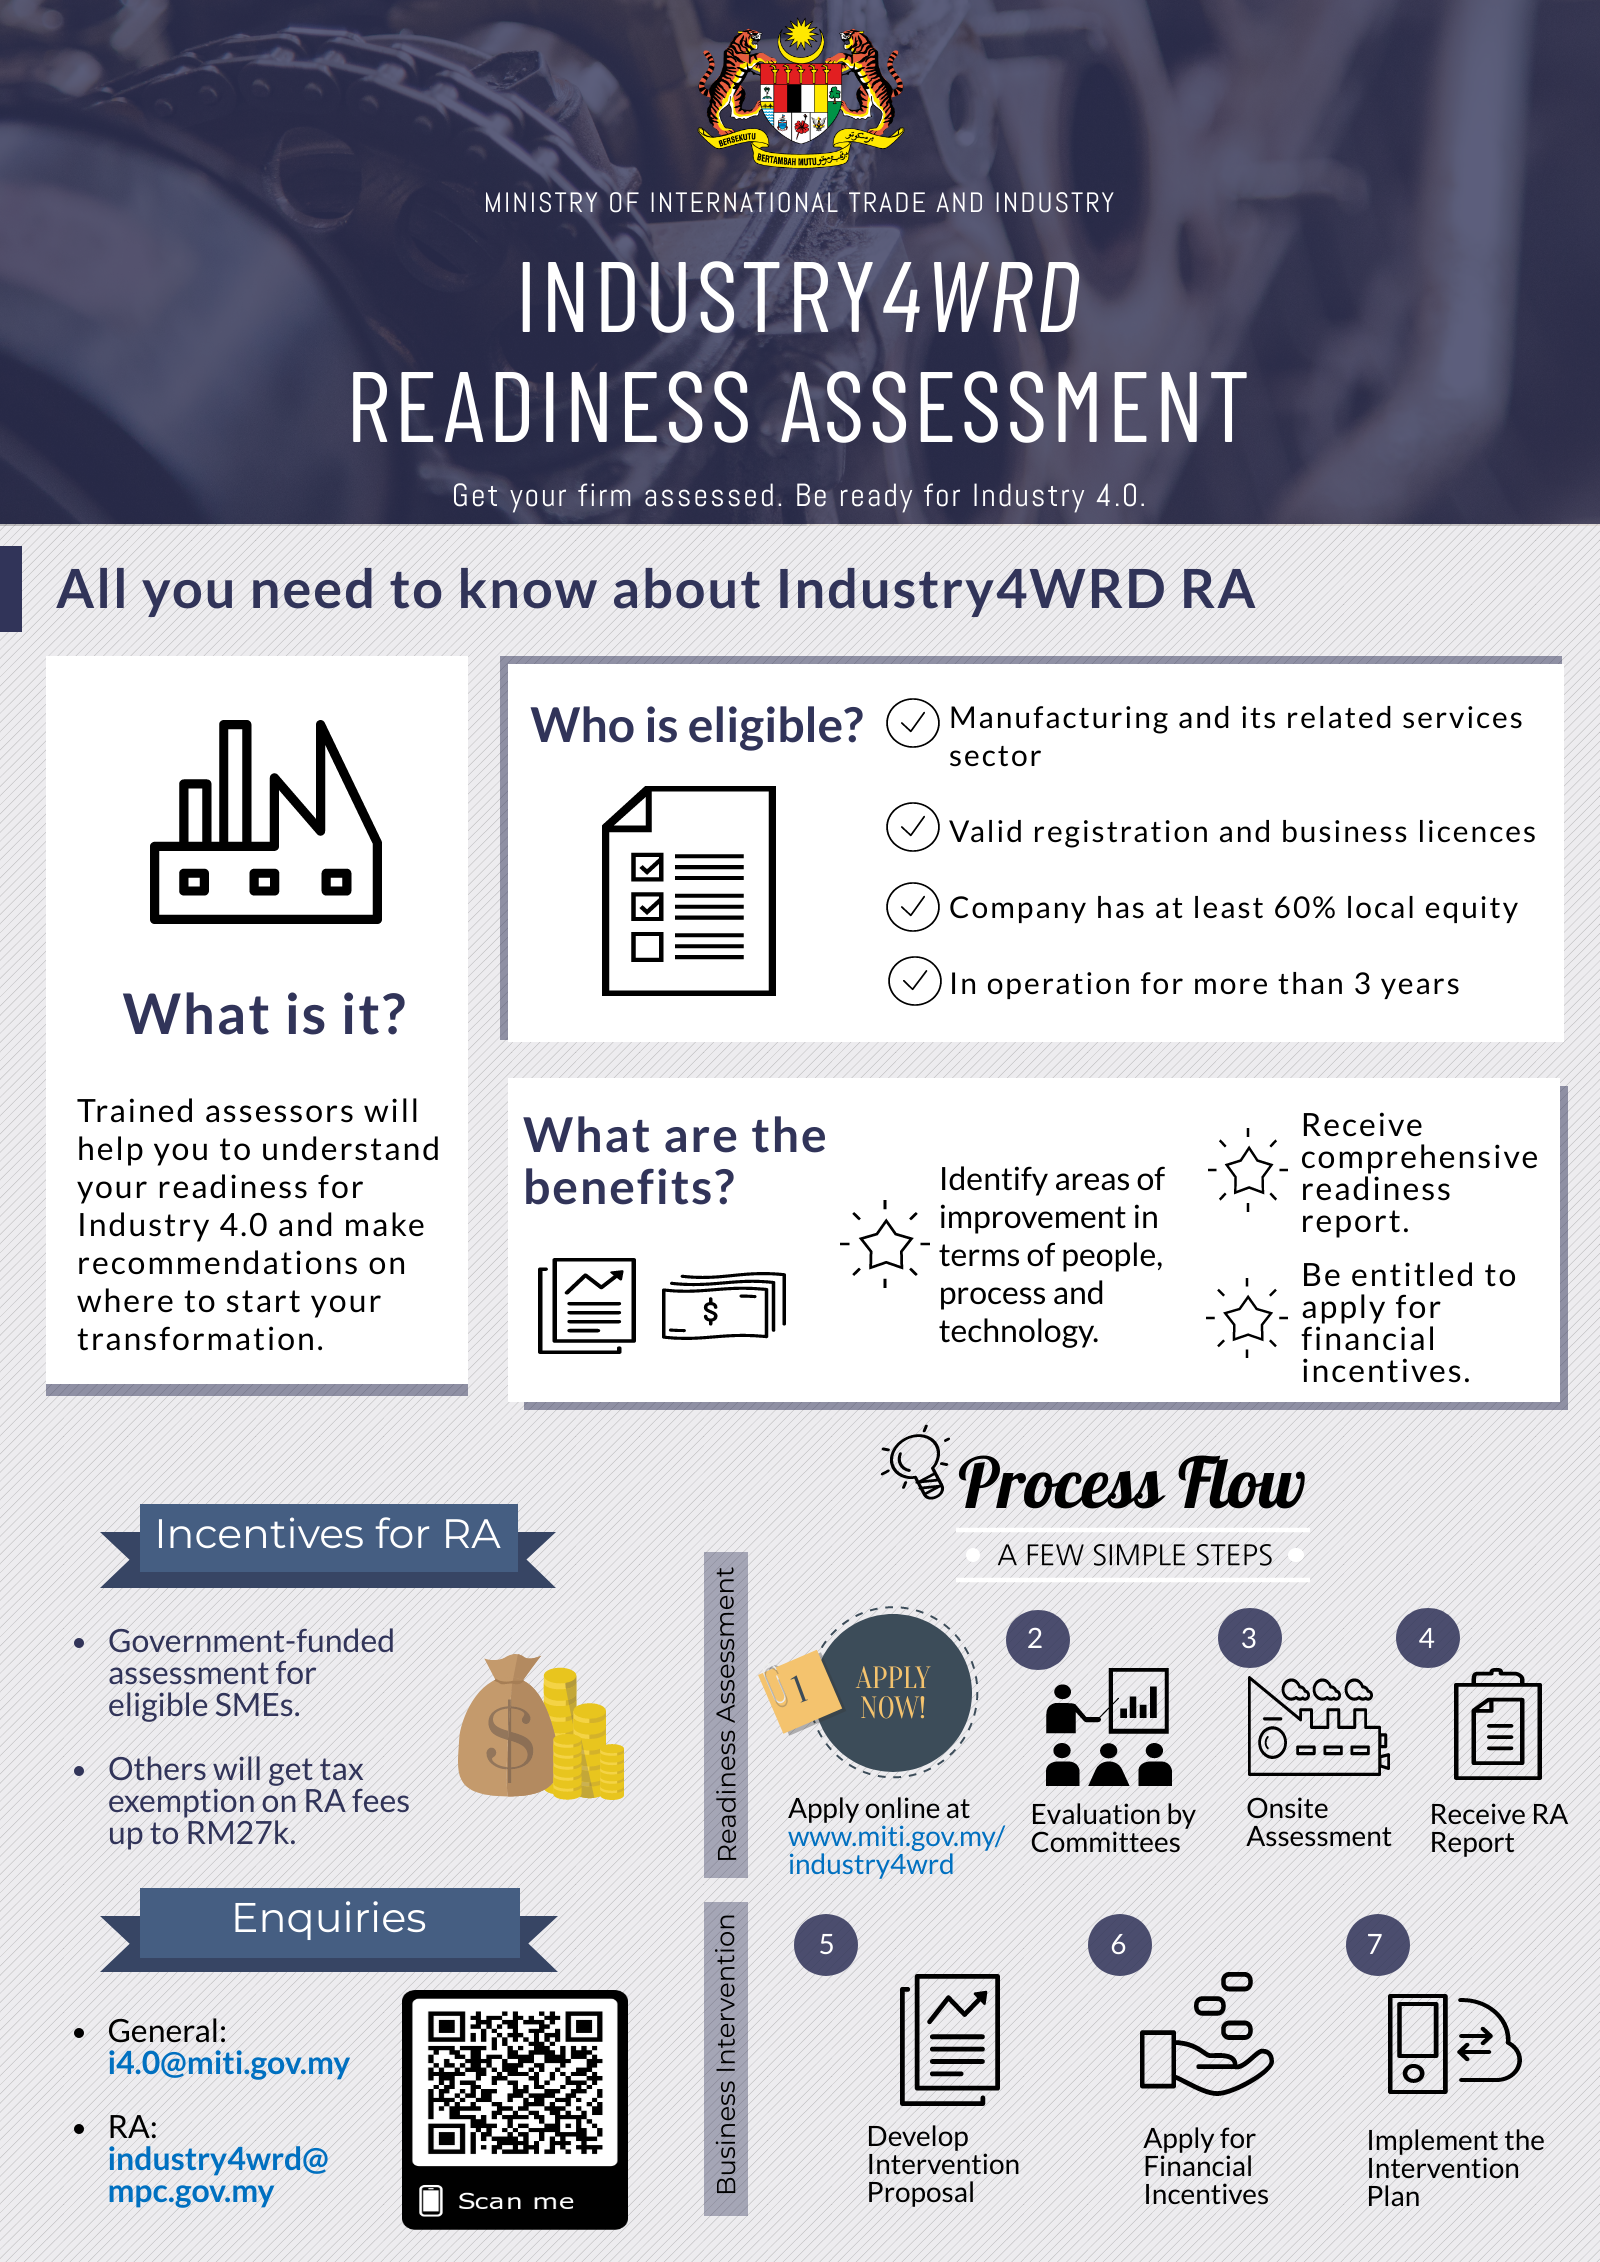 Industry4WRD Readiniss Assessment